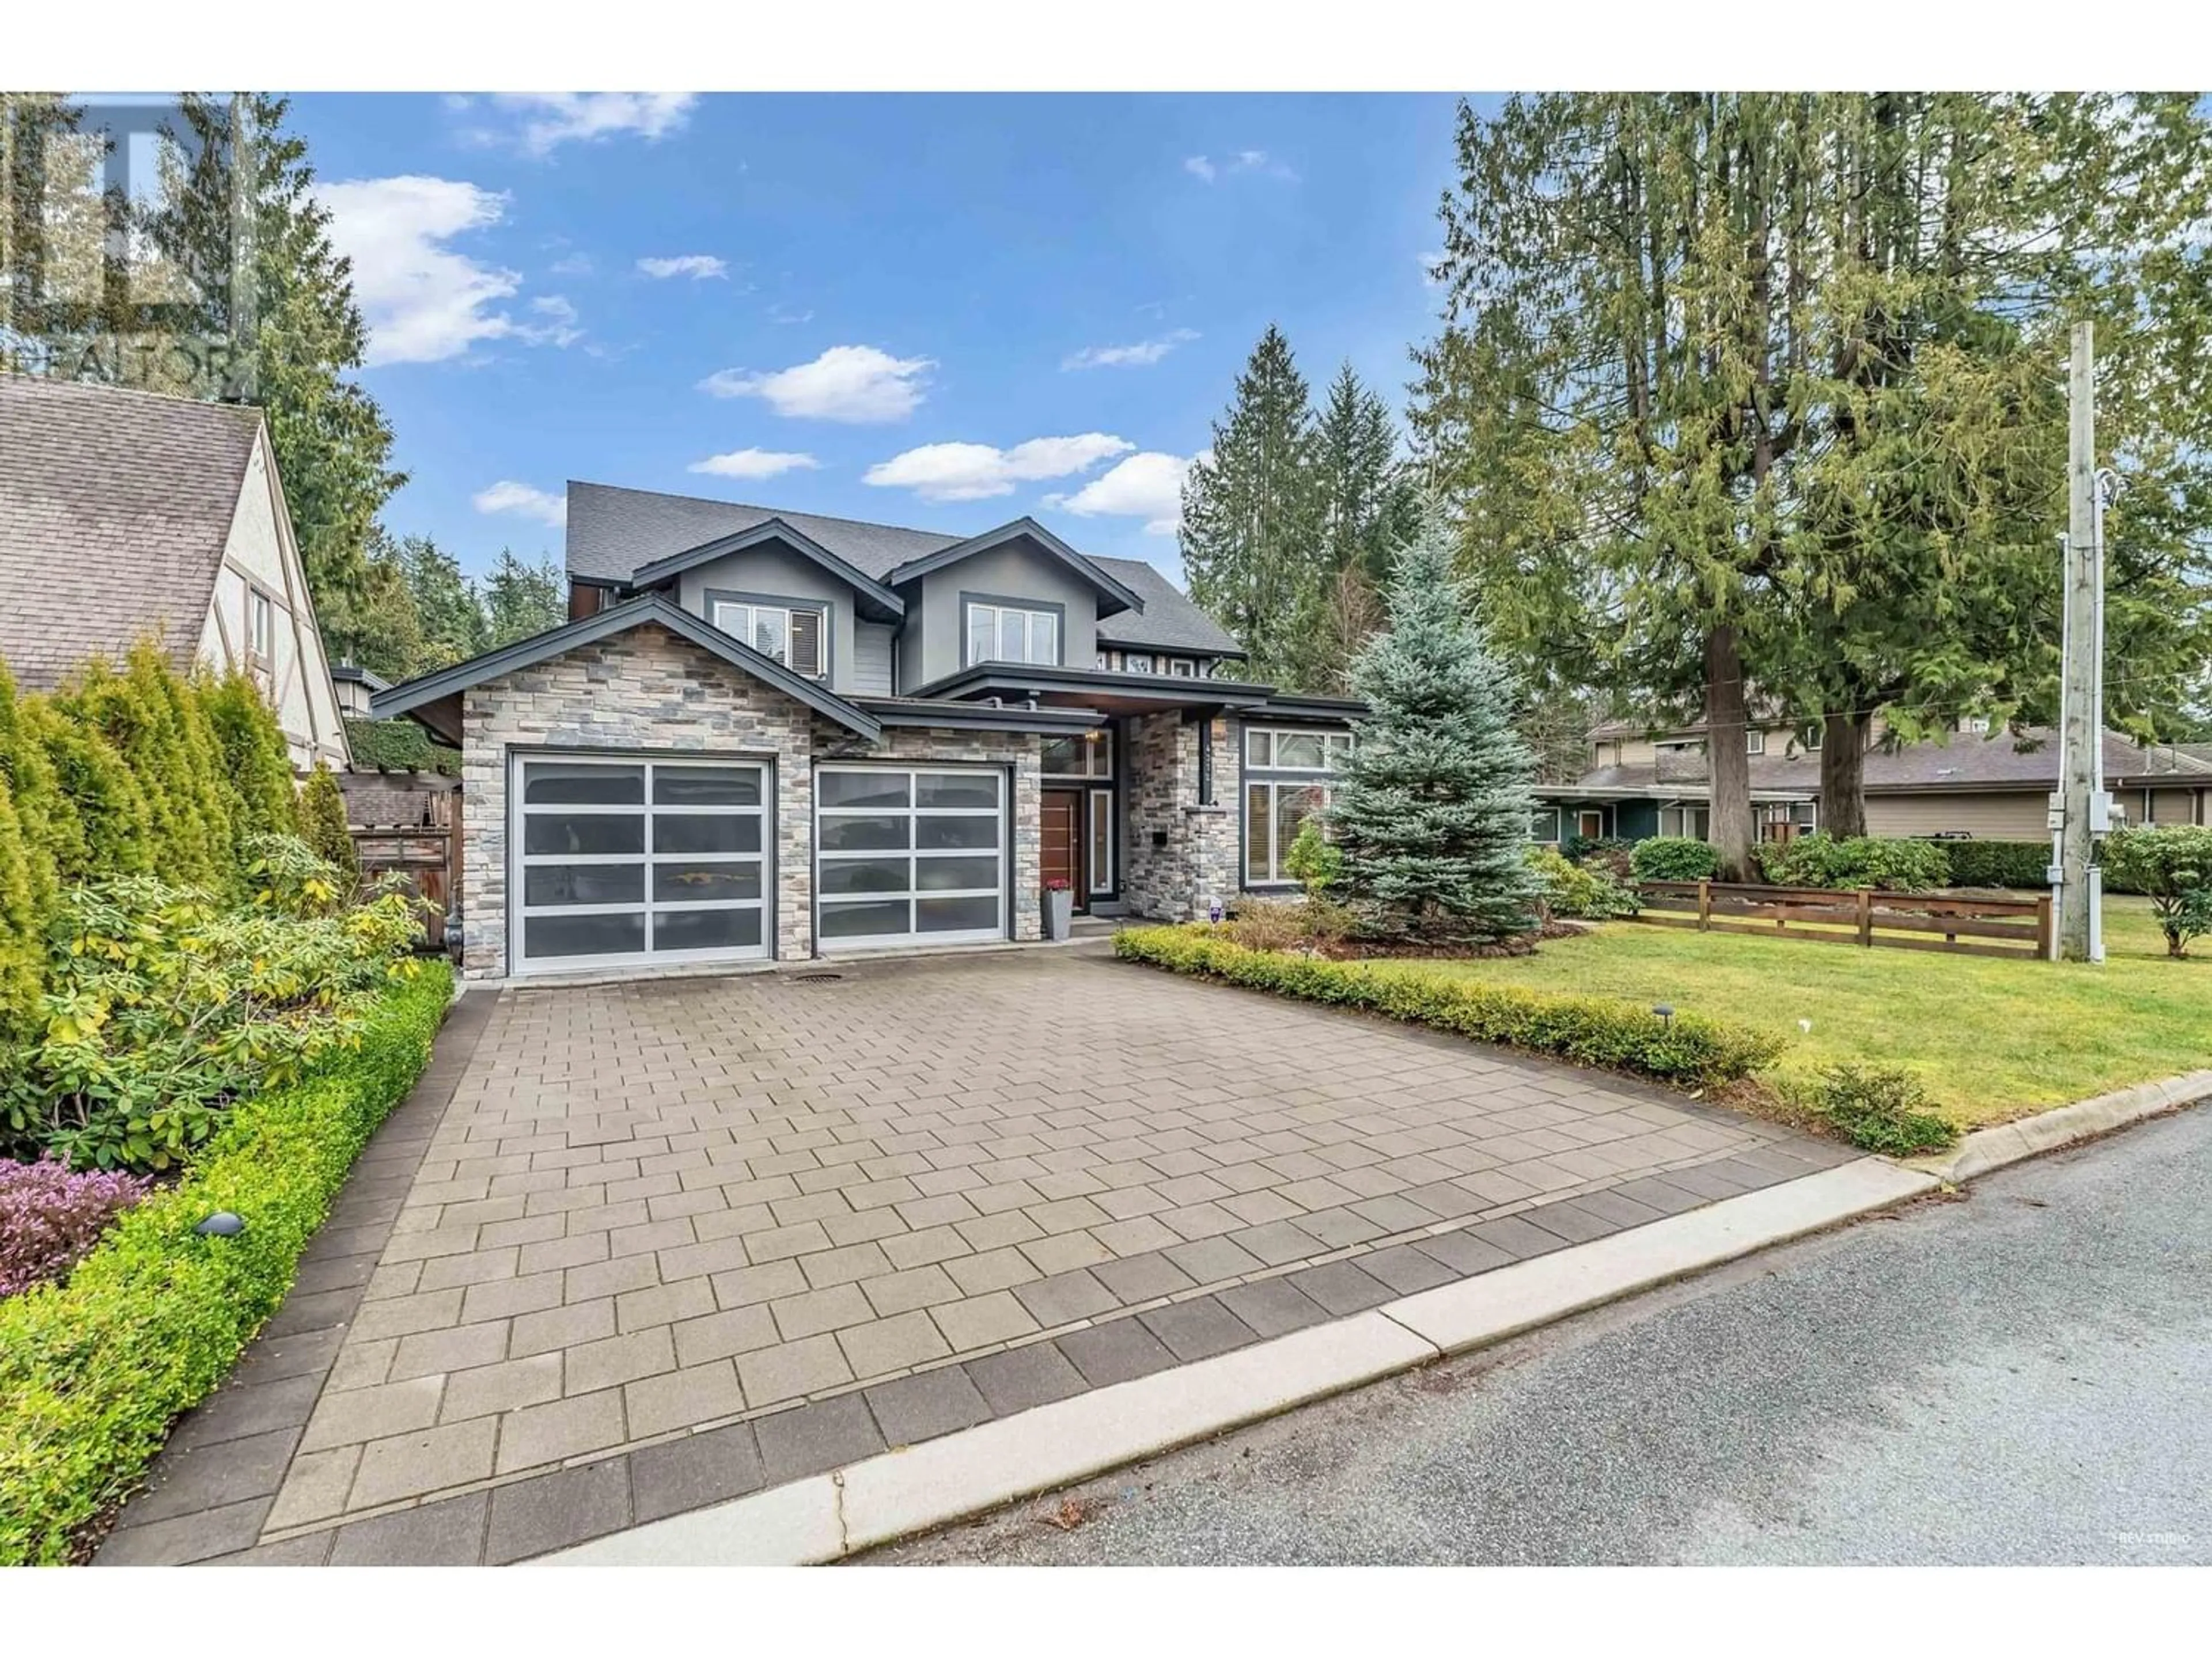 Home with brick exterior material for 4372 CAROLYN DRIVE, North Vancouver British Columbia V7R4A6